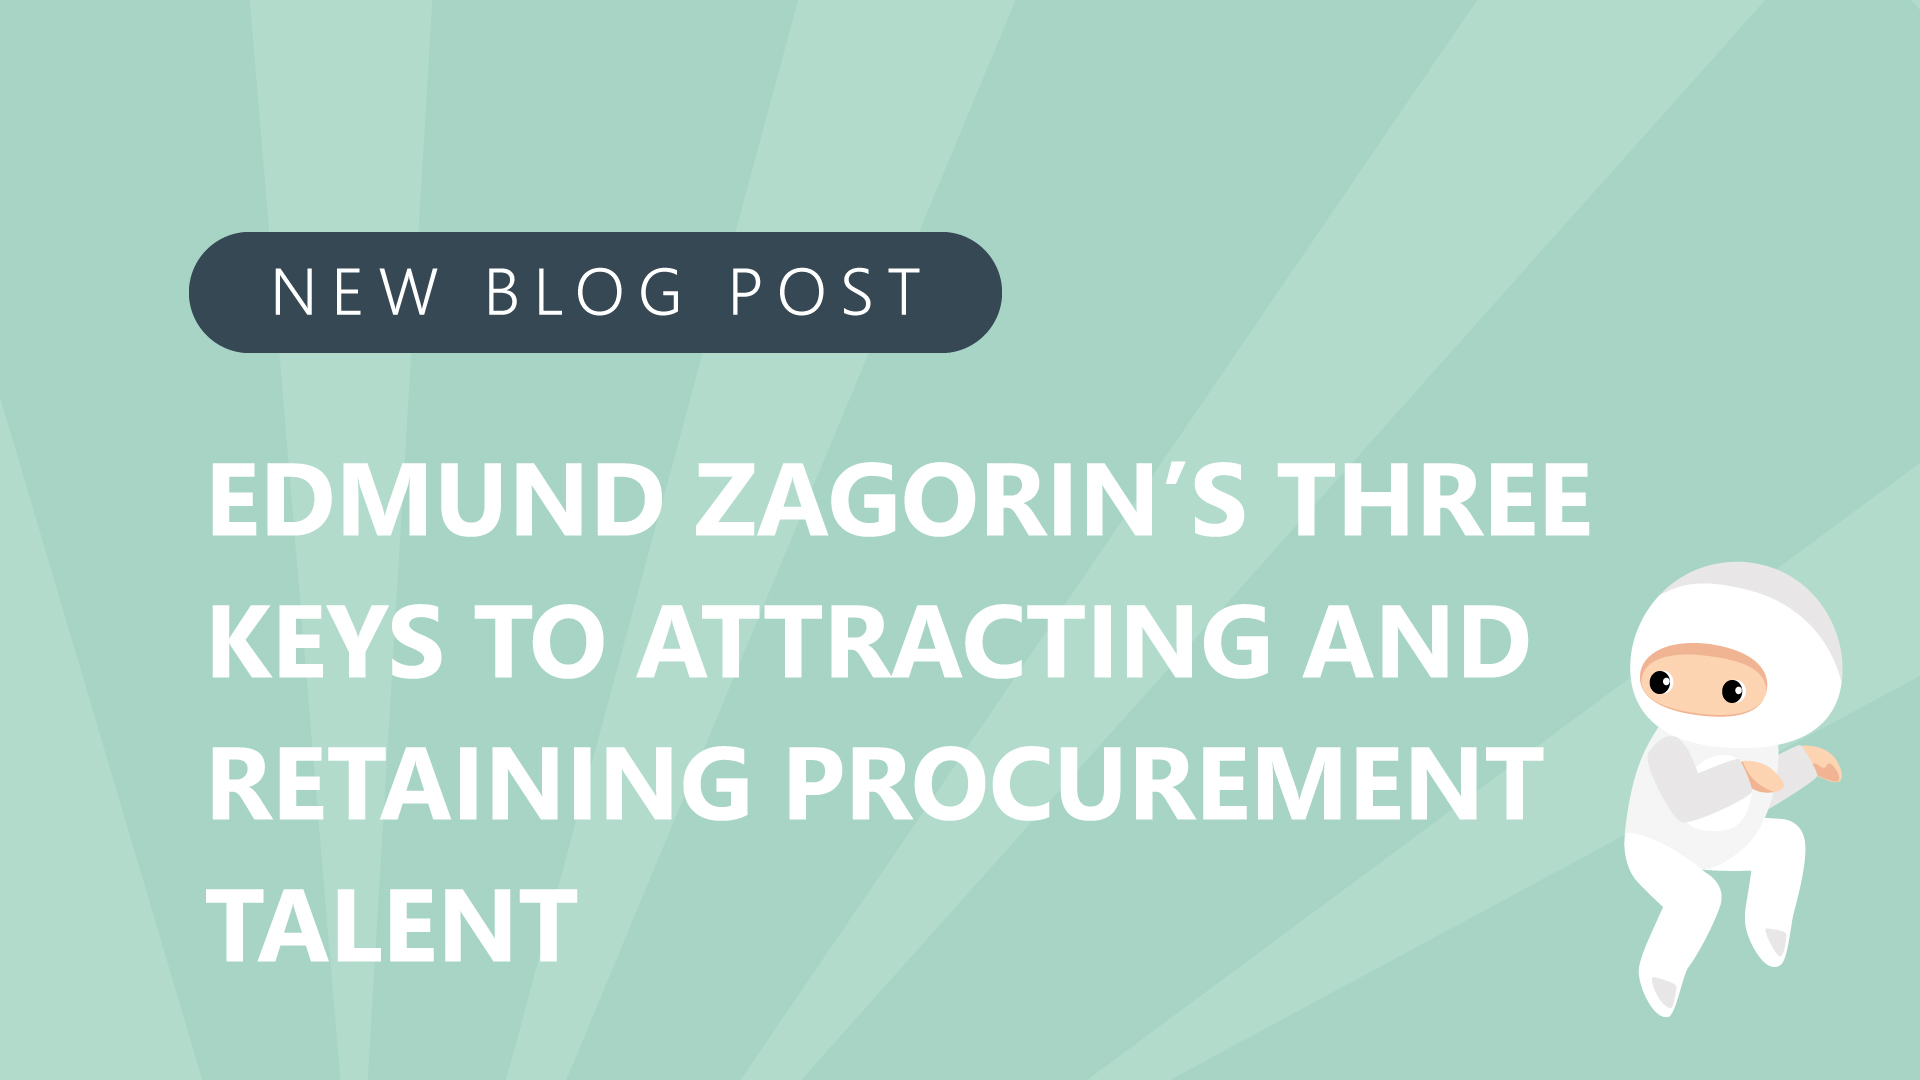 Edmund-Zagorins-Three-Keys-to-Attracting-and-Retaining-Procurement-Talent_Approved-2.jpg